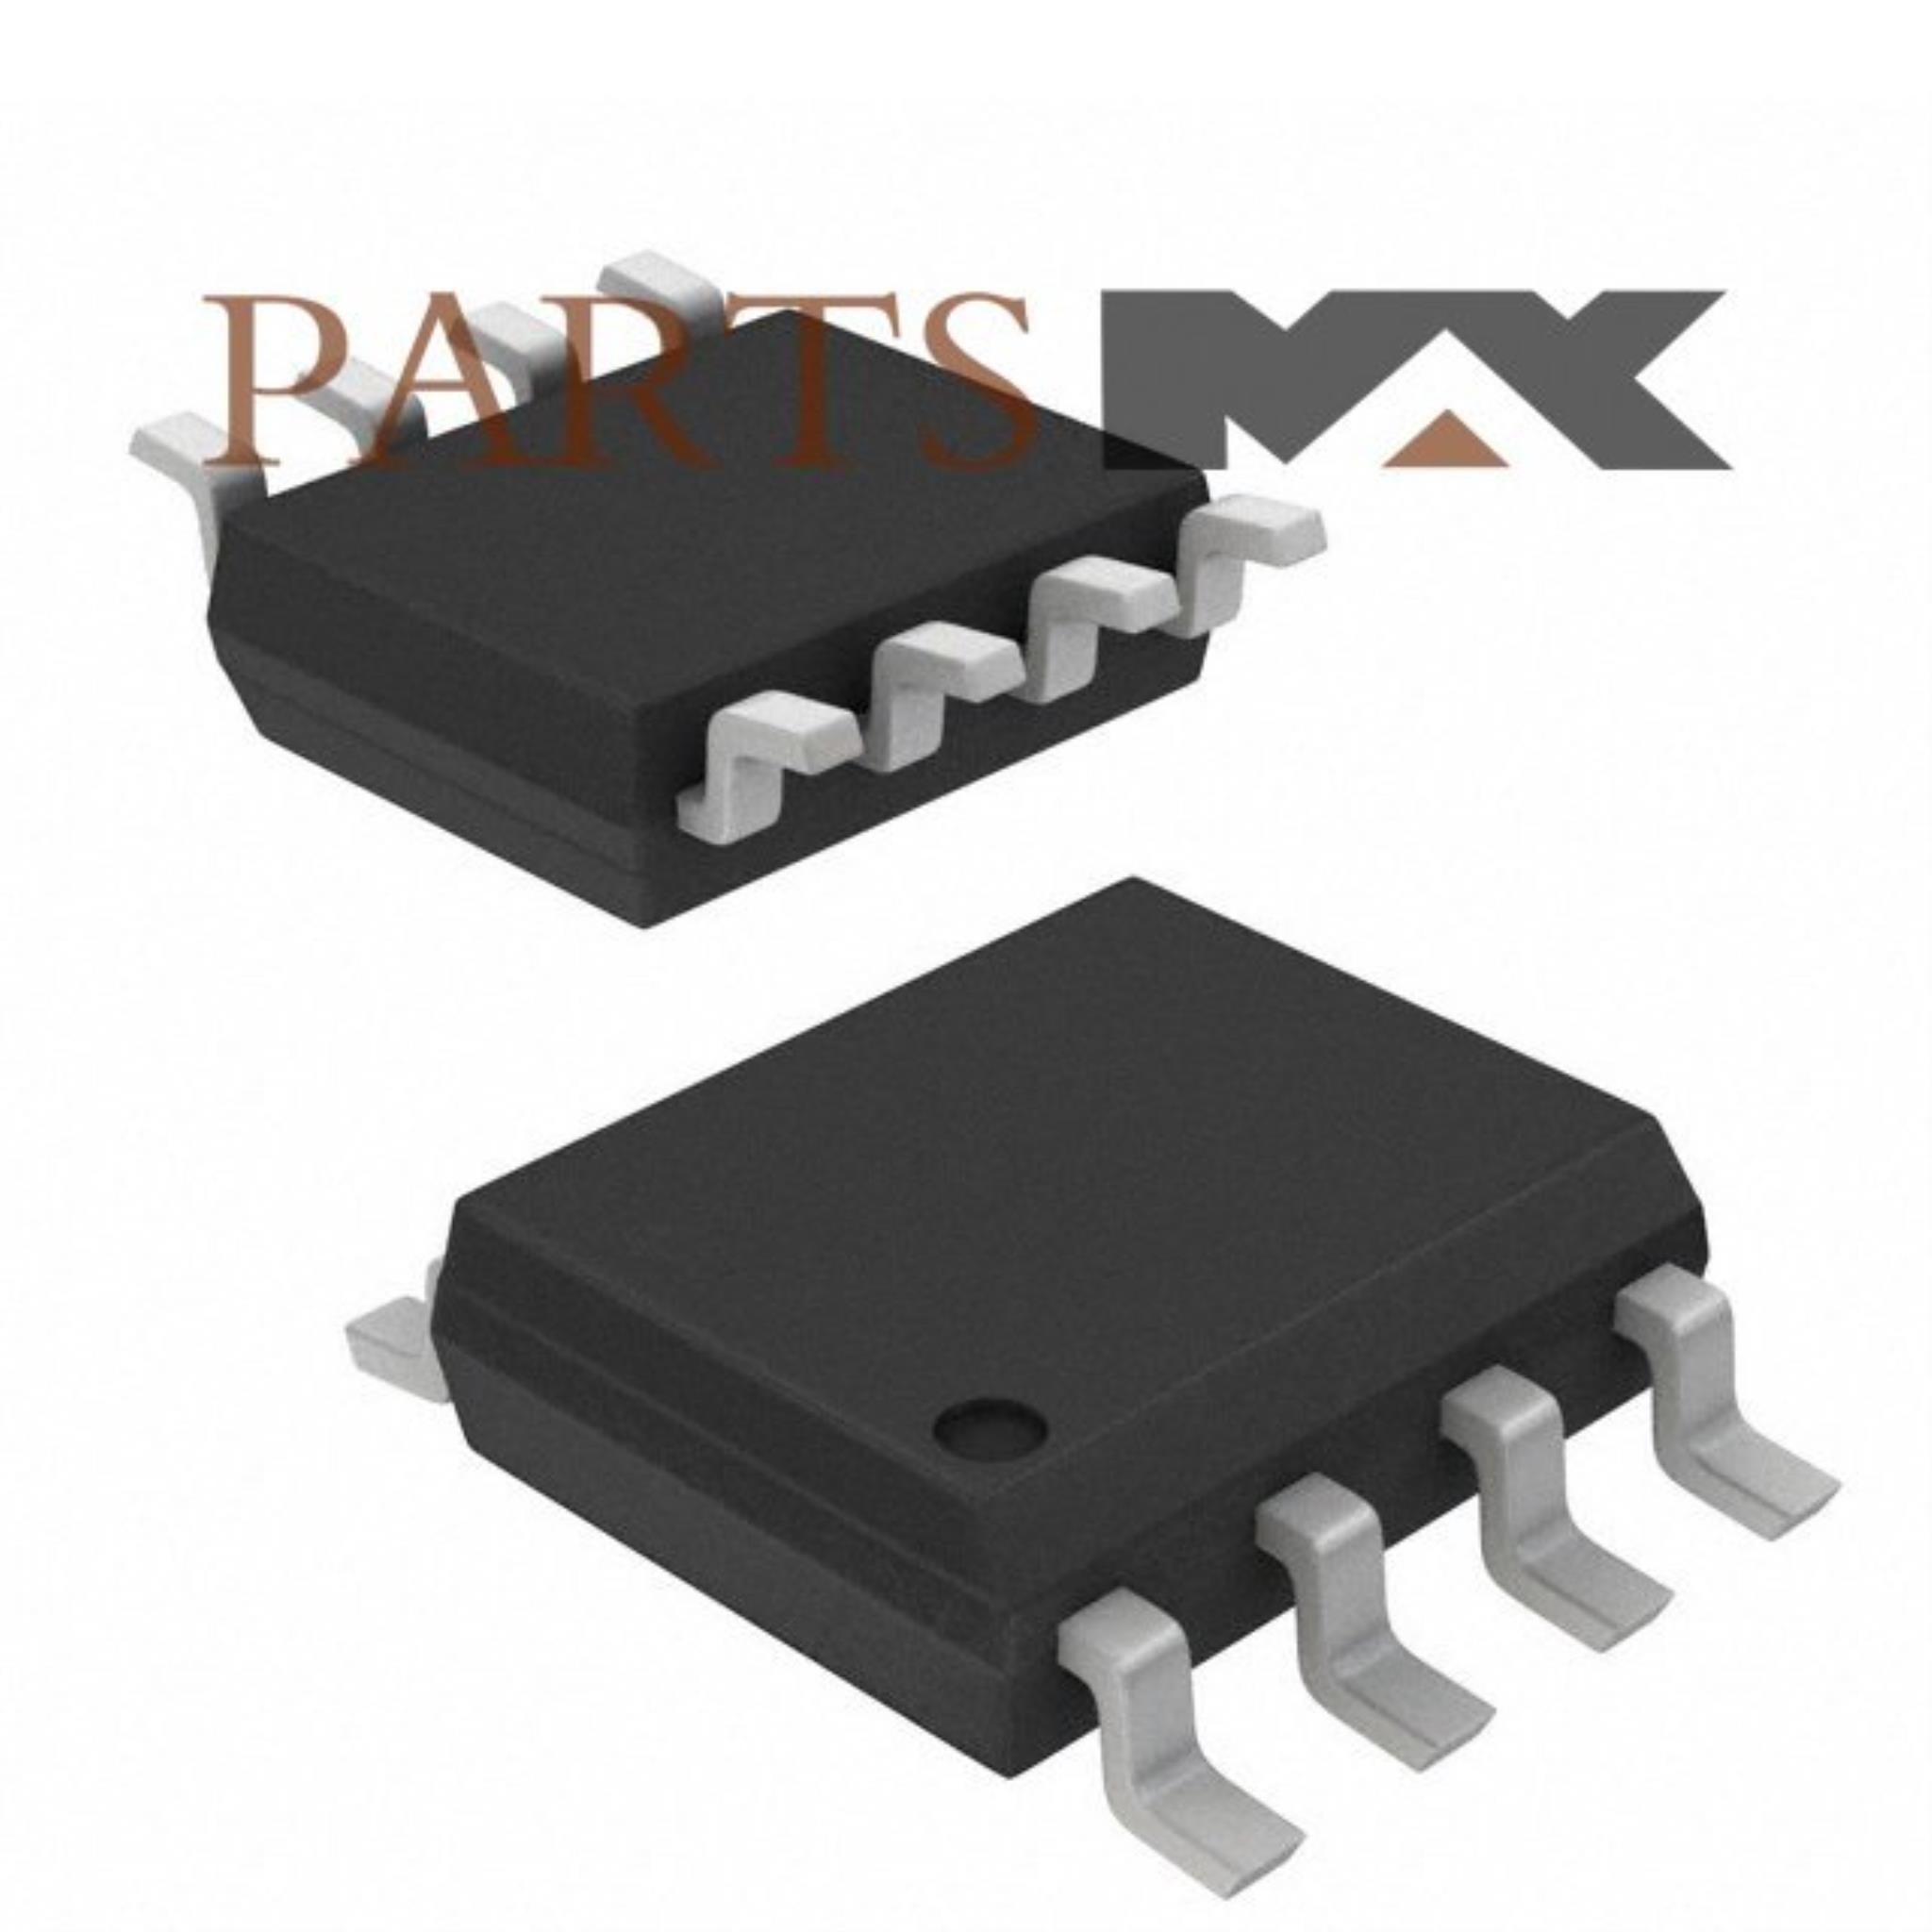 Picture of MOCD207M ON Semiconductor | Partsmax Türkiye